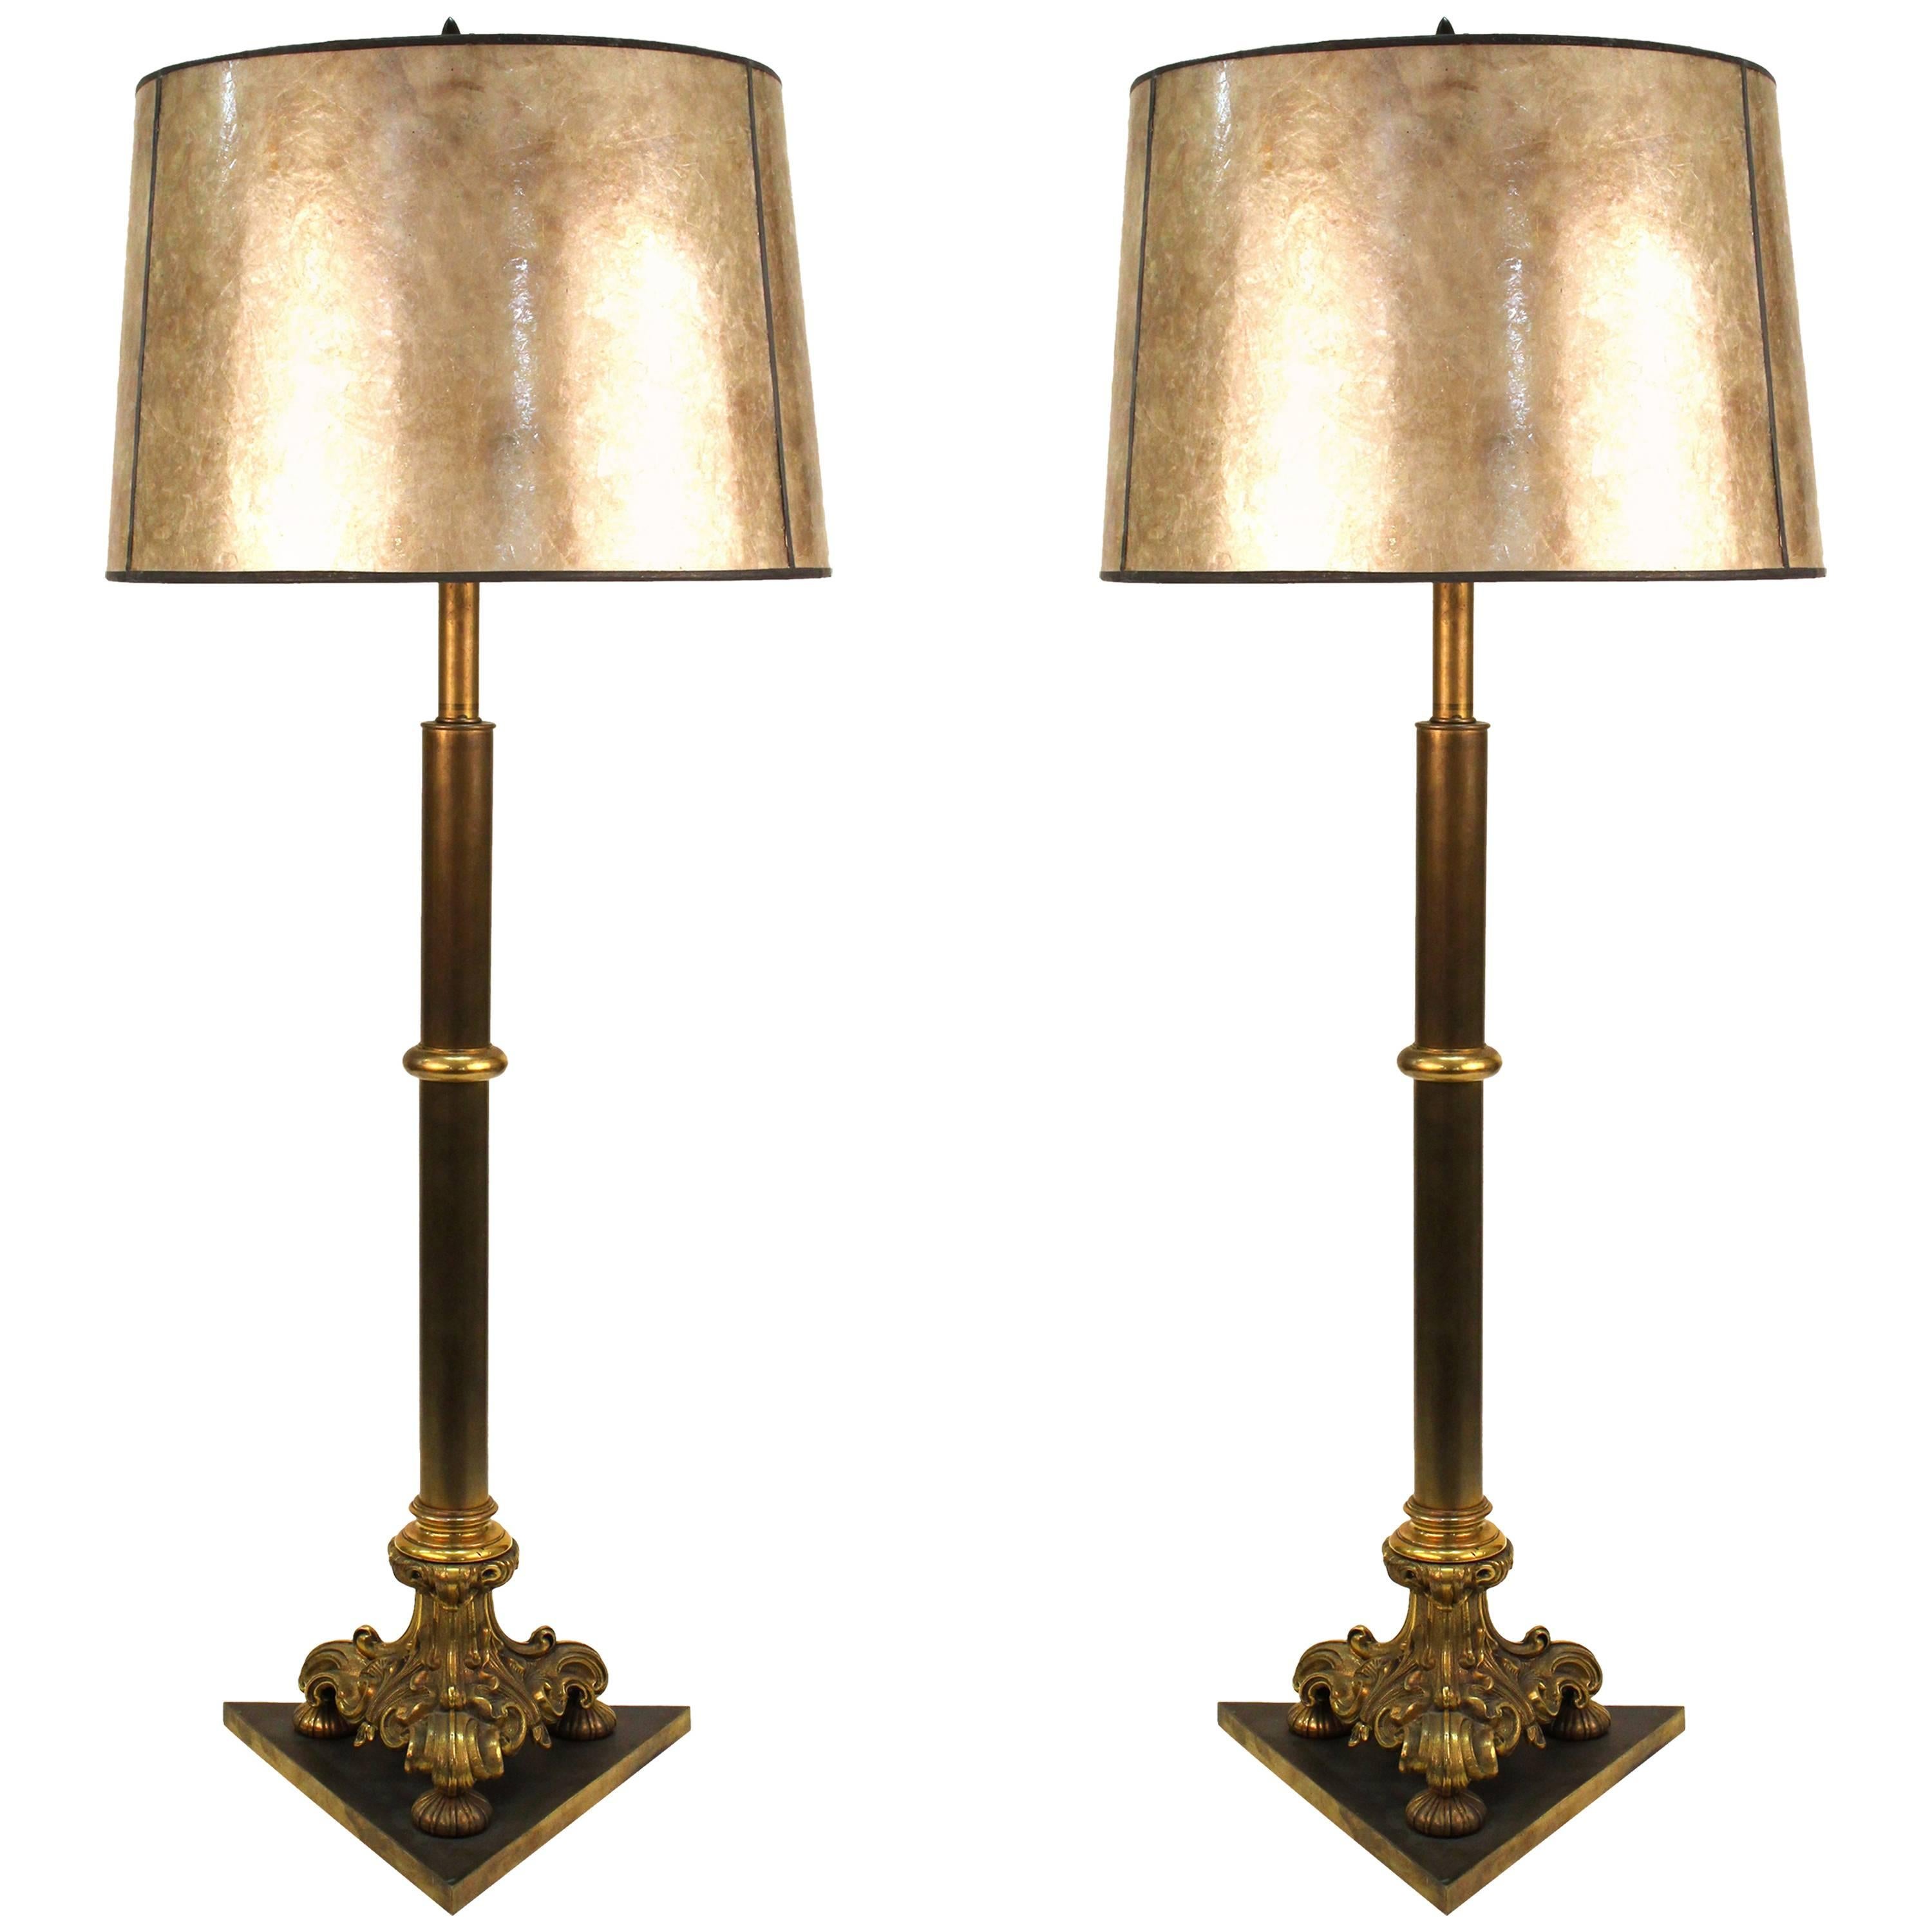 Early 20th Century Pair of Neoclassical Style Bronze Lamps